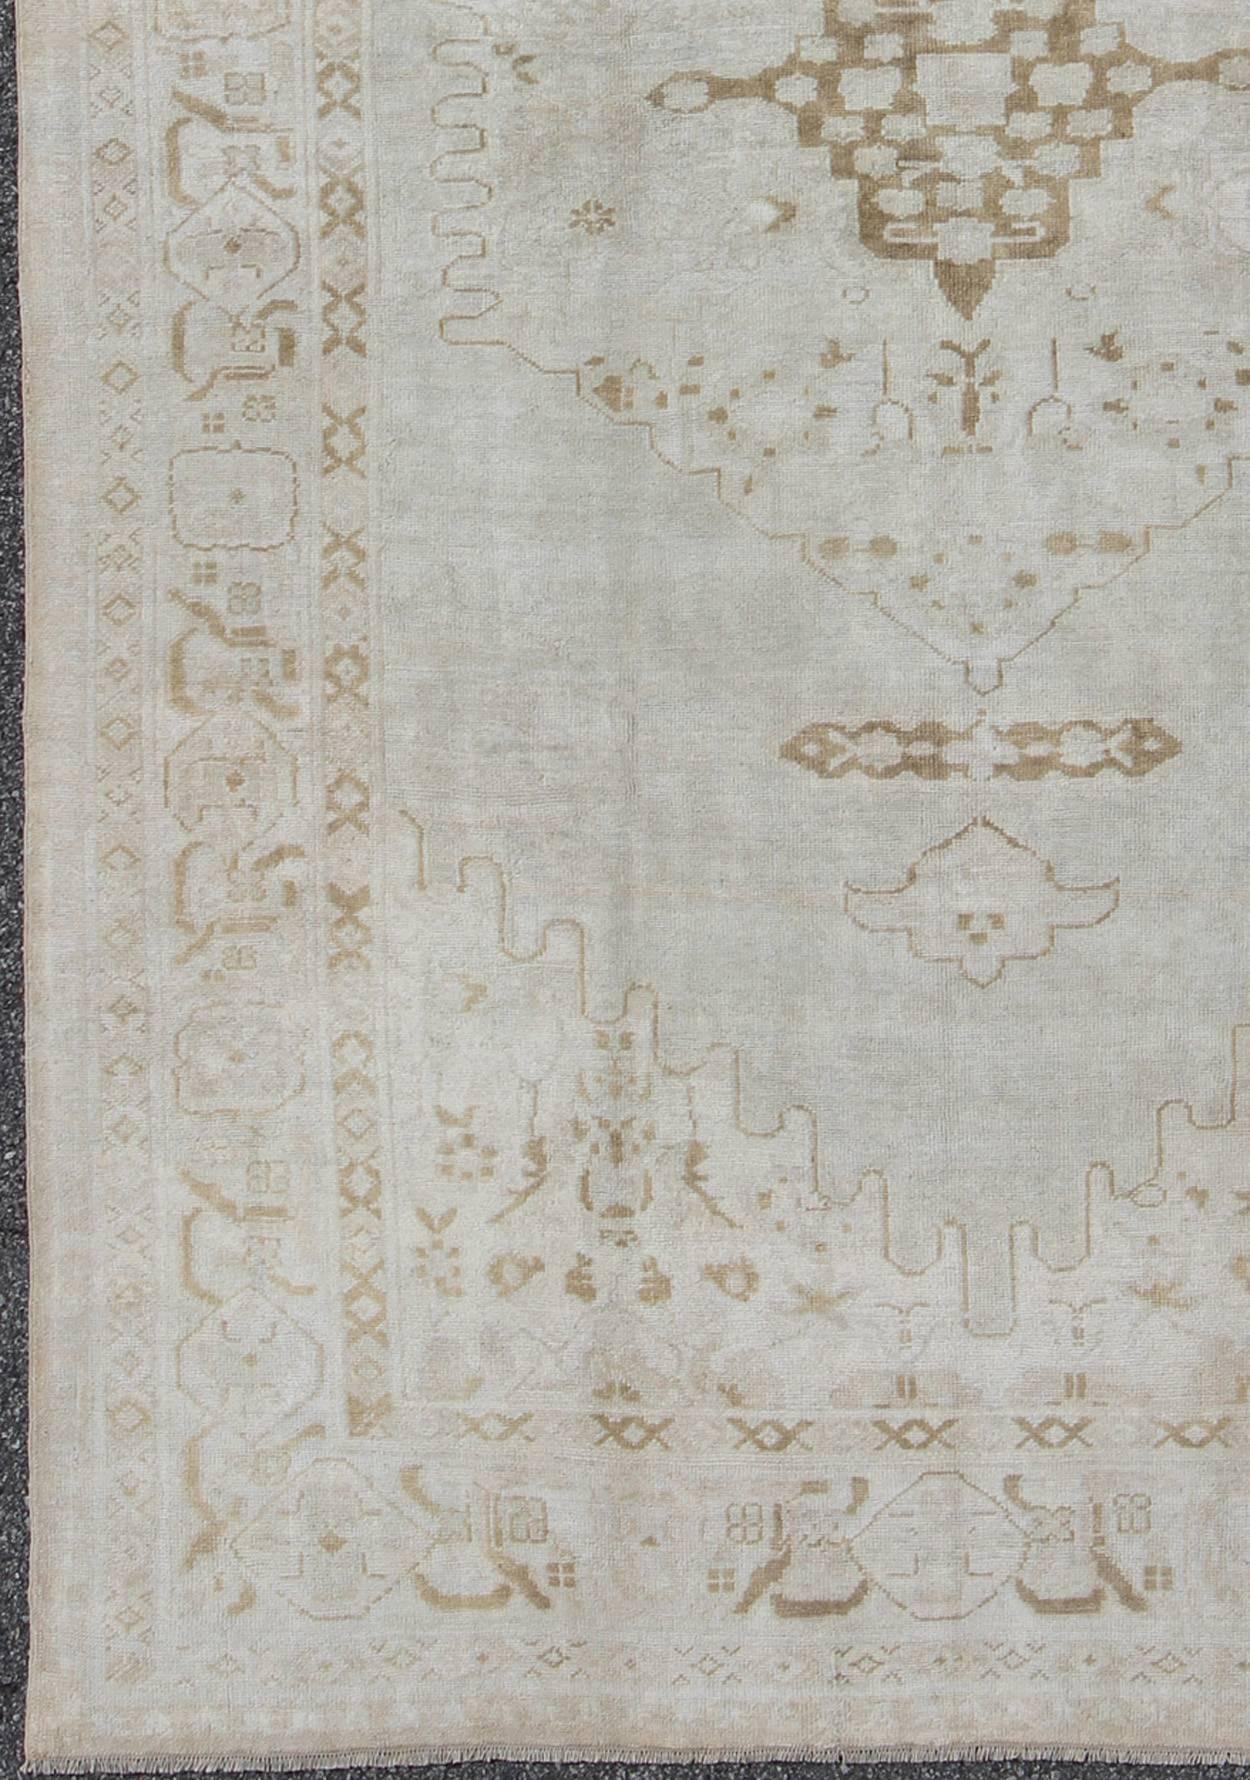 Measures: 7'3'' x 11'2''.
This vintage Oushak carpet beautifully integrates neutral color compositions to decorate a calm and serene room with a subtle geometric medallion pattern rendered in a faded gold, brining more life to the piece.  This rug